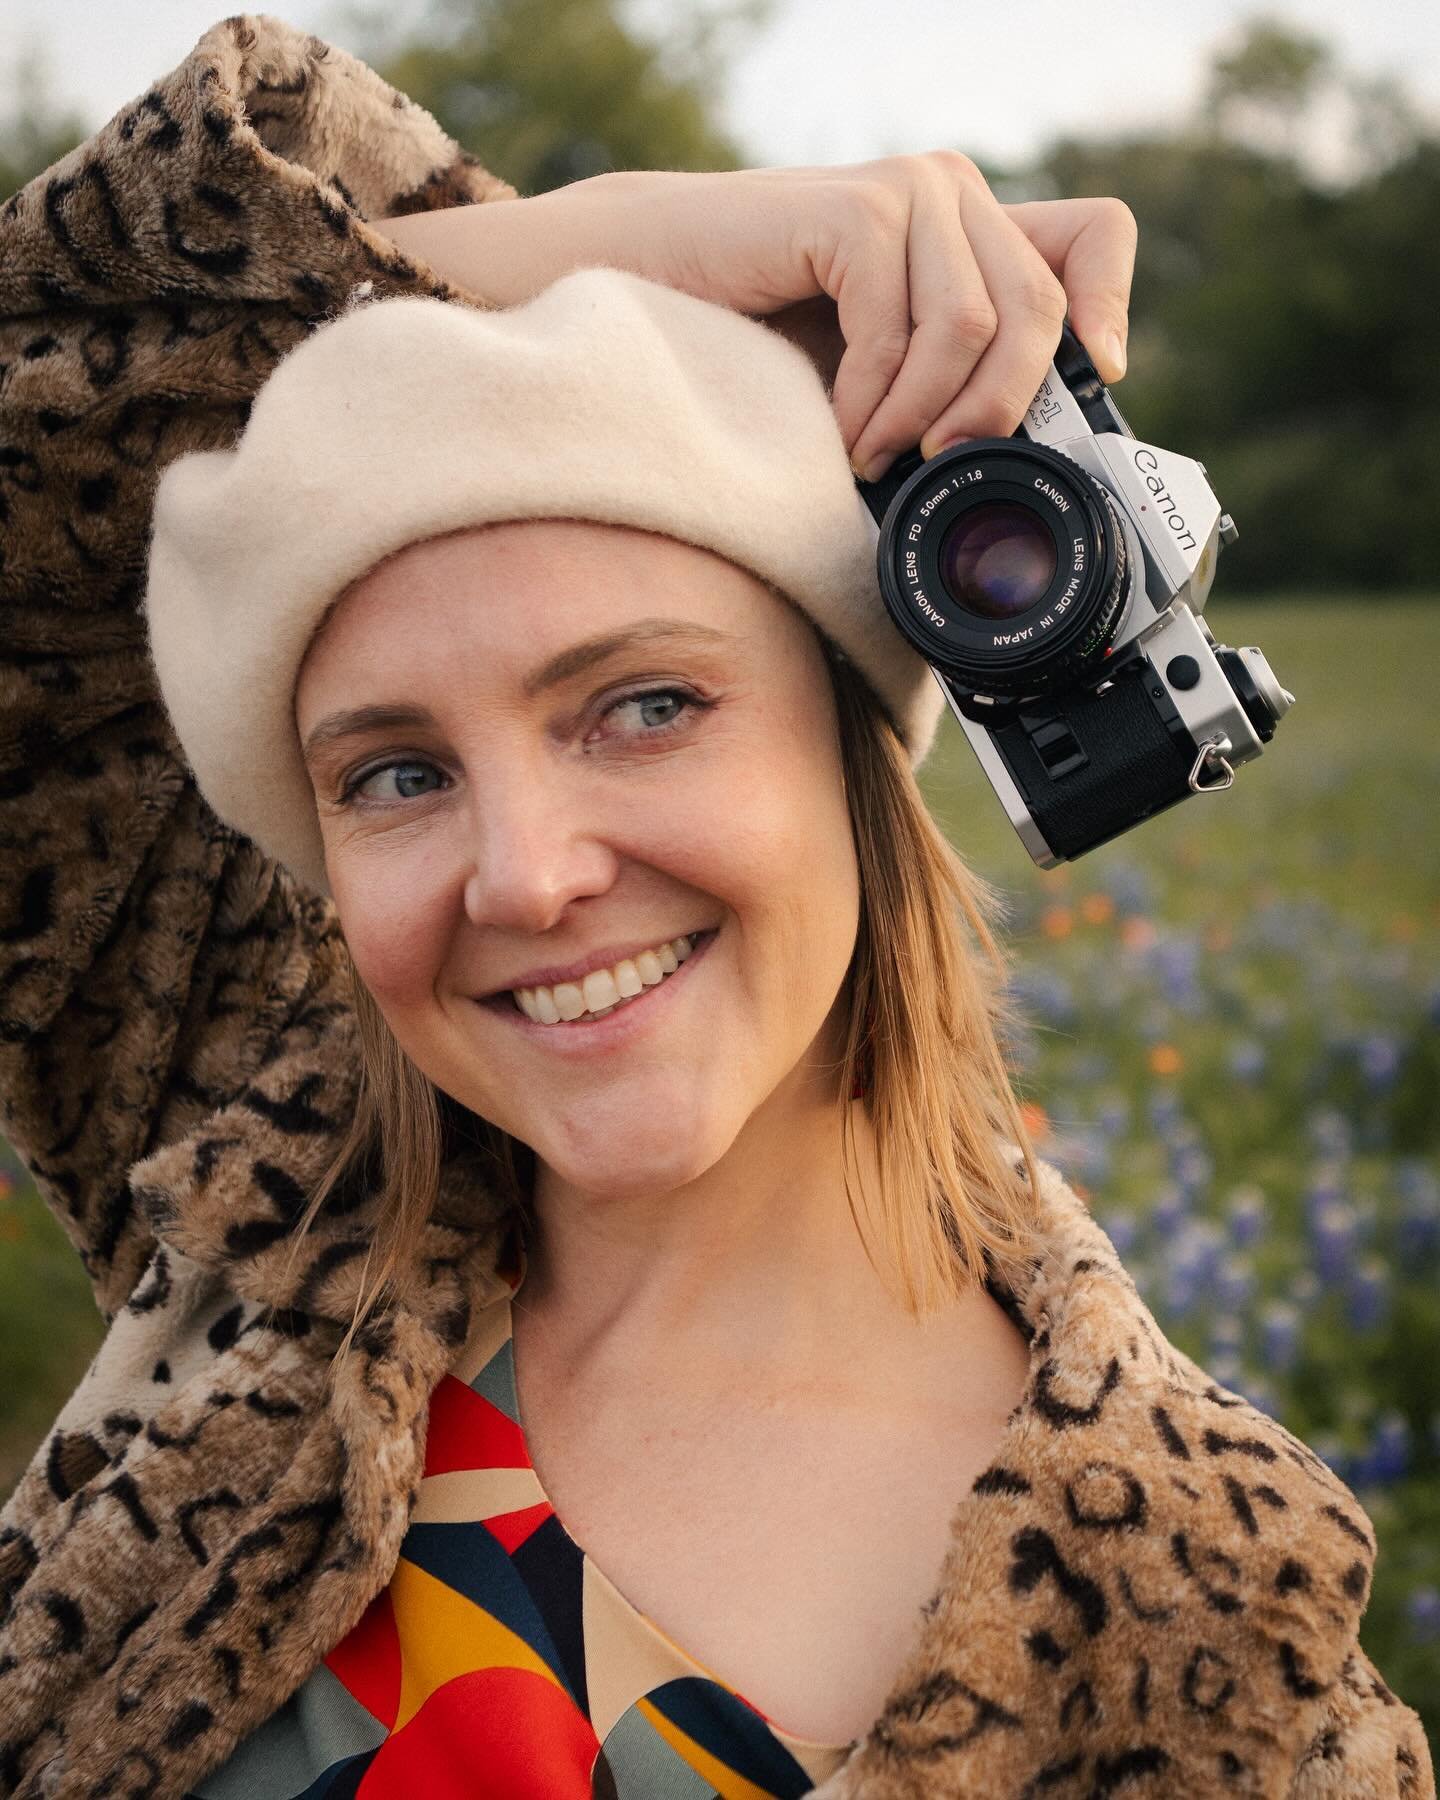 Hi!! It&rsquo;s been some time since I&rsquo;ve shared my face on here, so here&rsquo;s a little bit about the lady behind the lens 📸 Drop a comment below if we have any of these in common! 

I love Wes Anderson movies. Royal Tenenbaums makes me cry